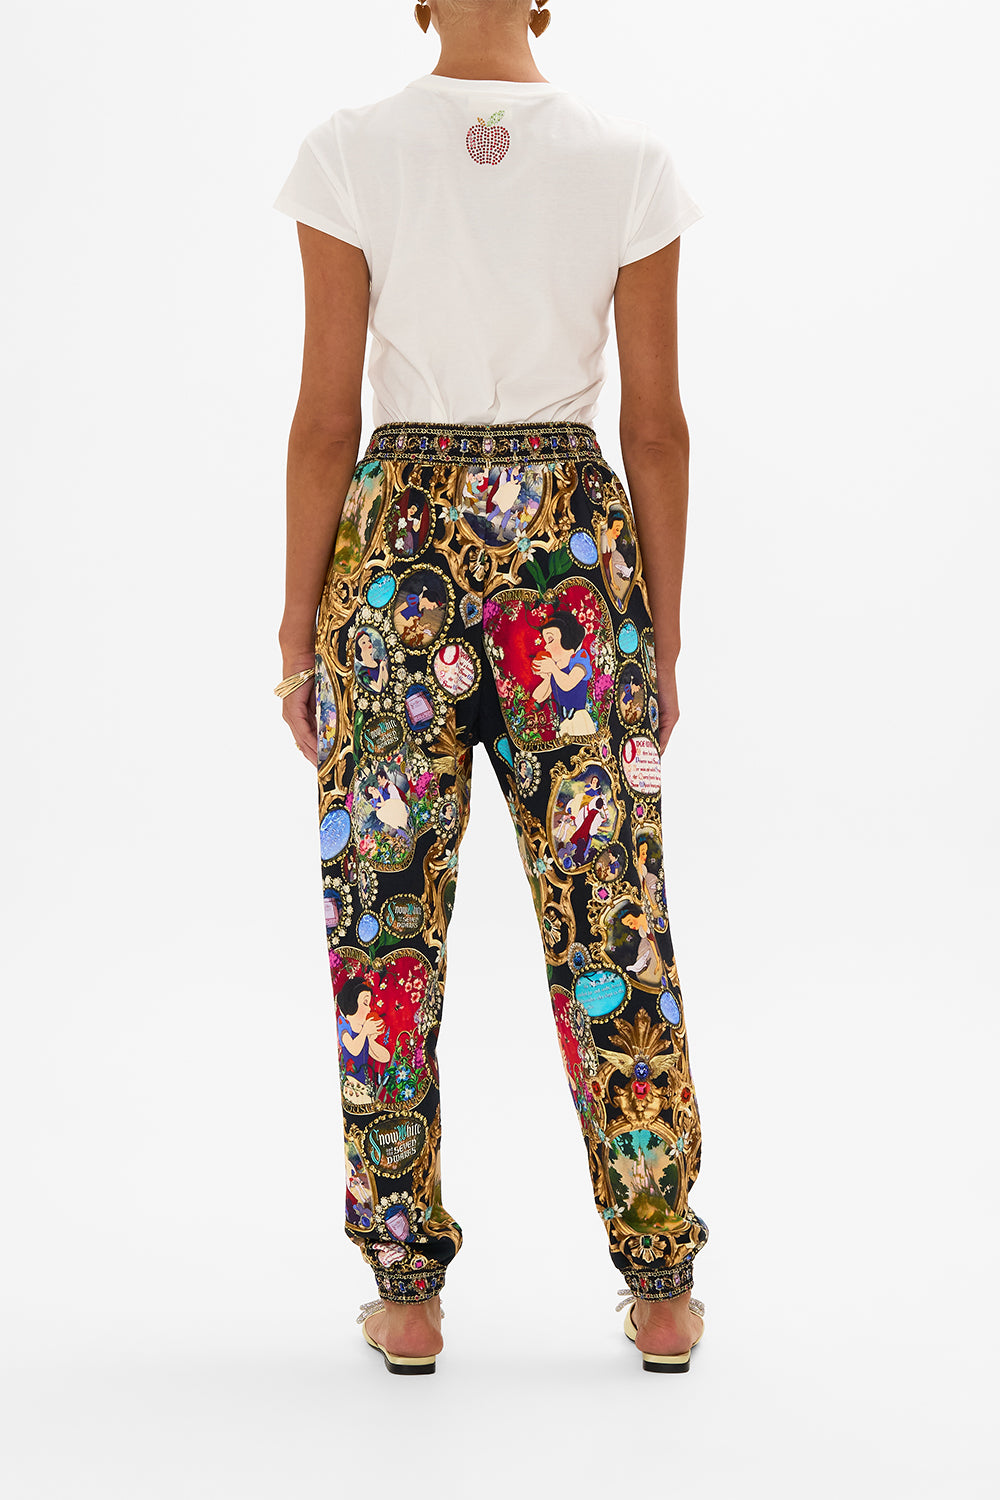 Disney CAMILLA jersey track pants in Happily Ever After print